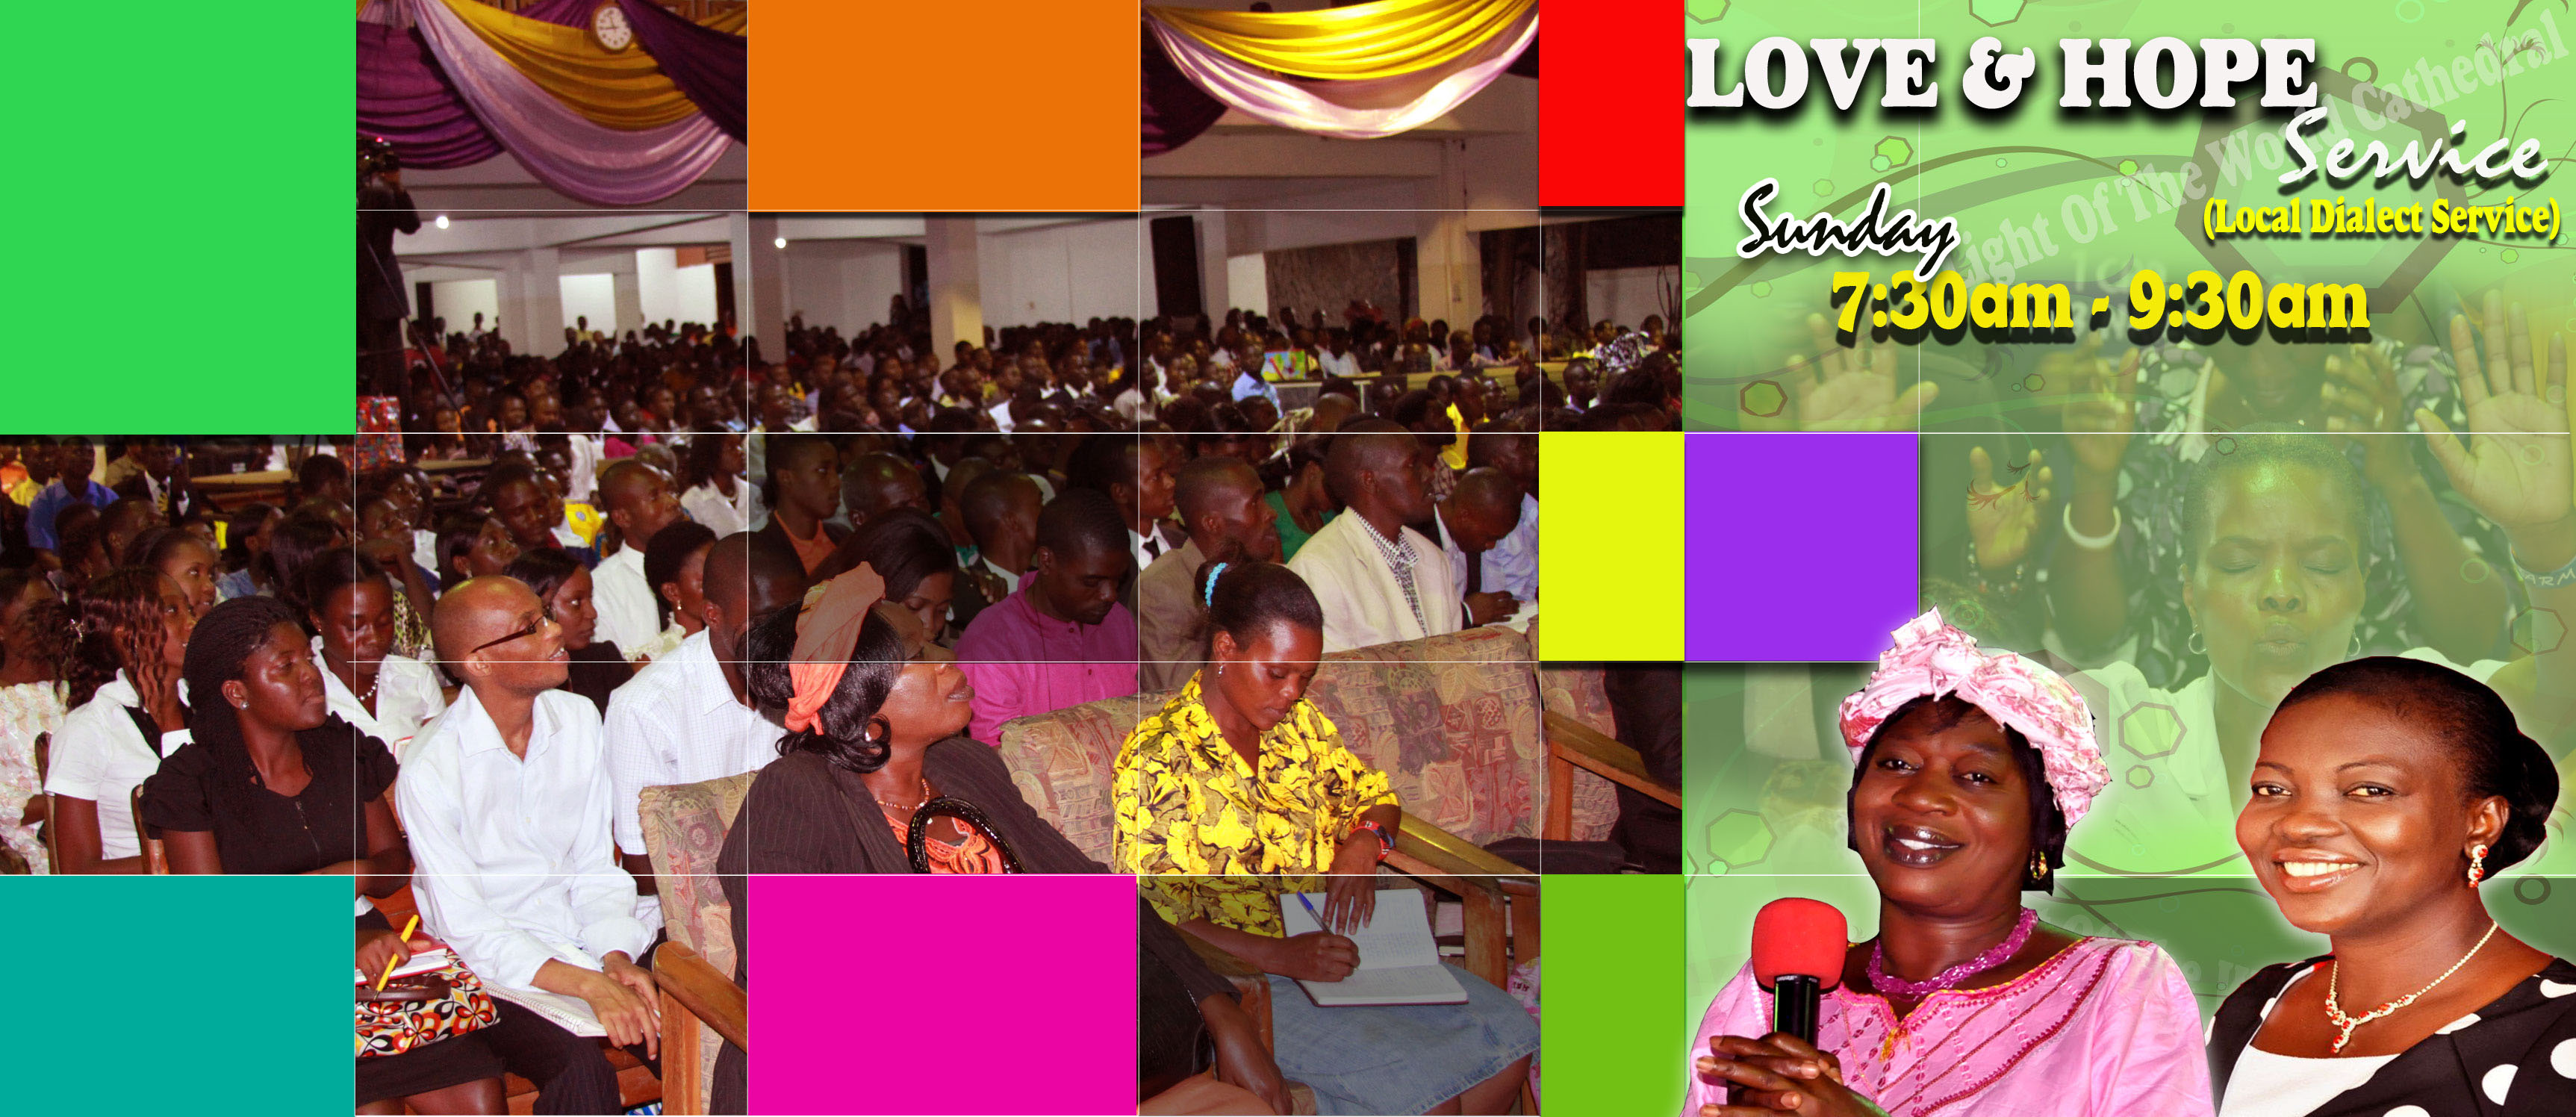 Love and Victory Service